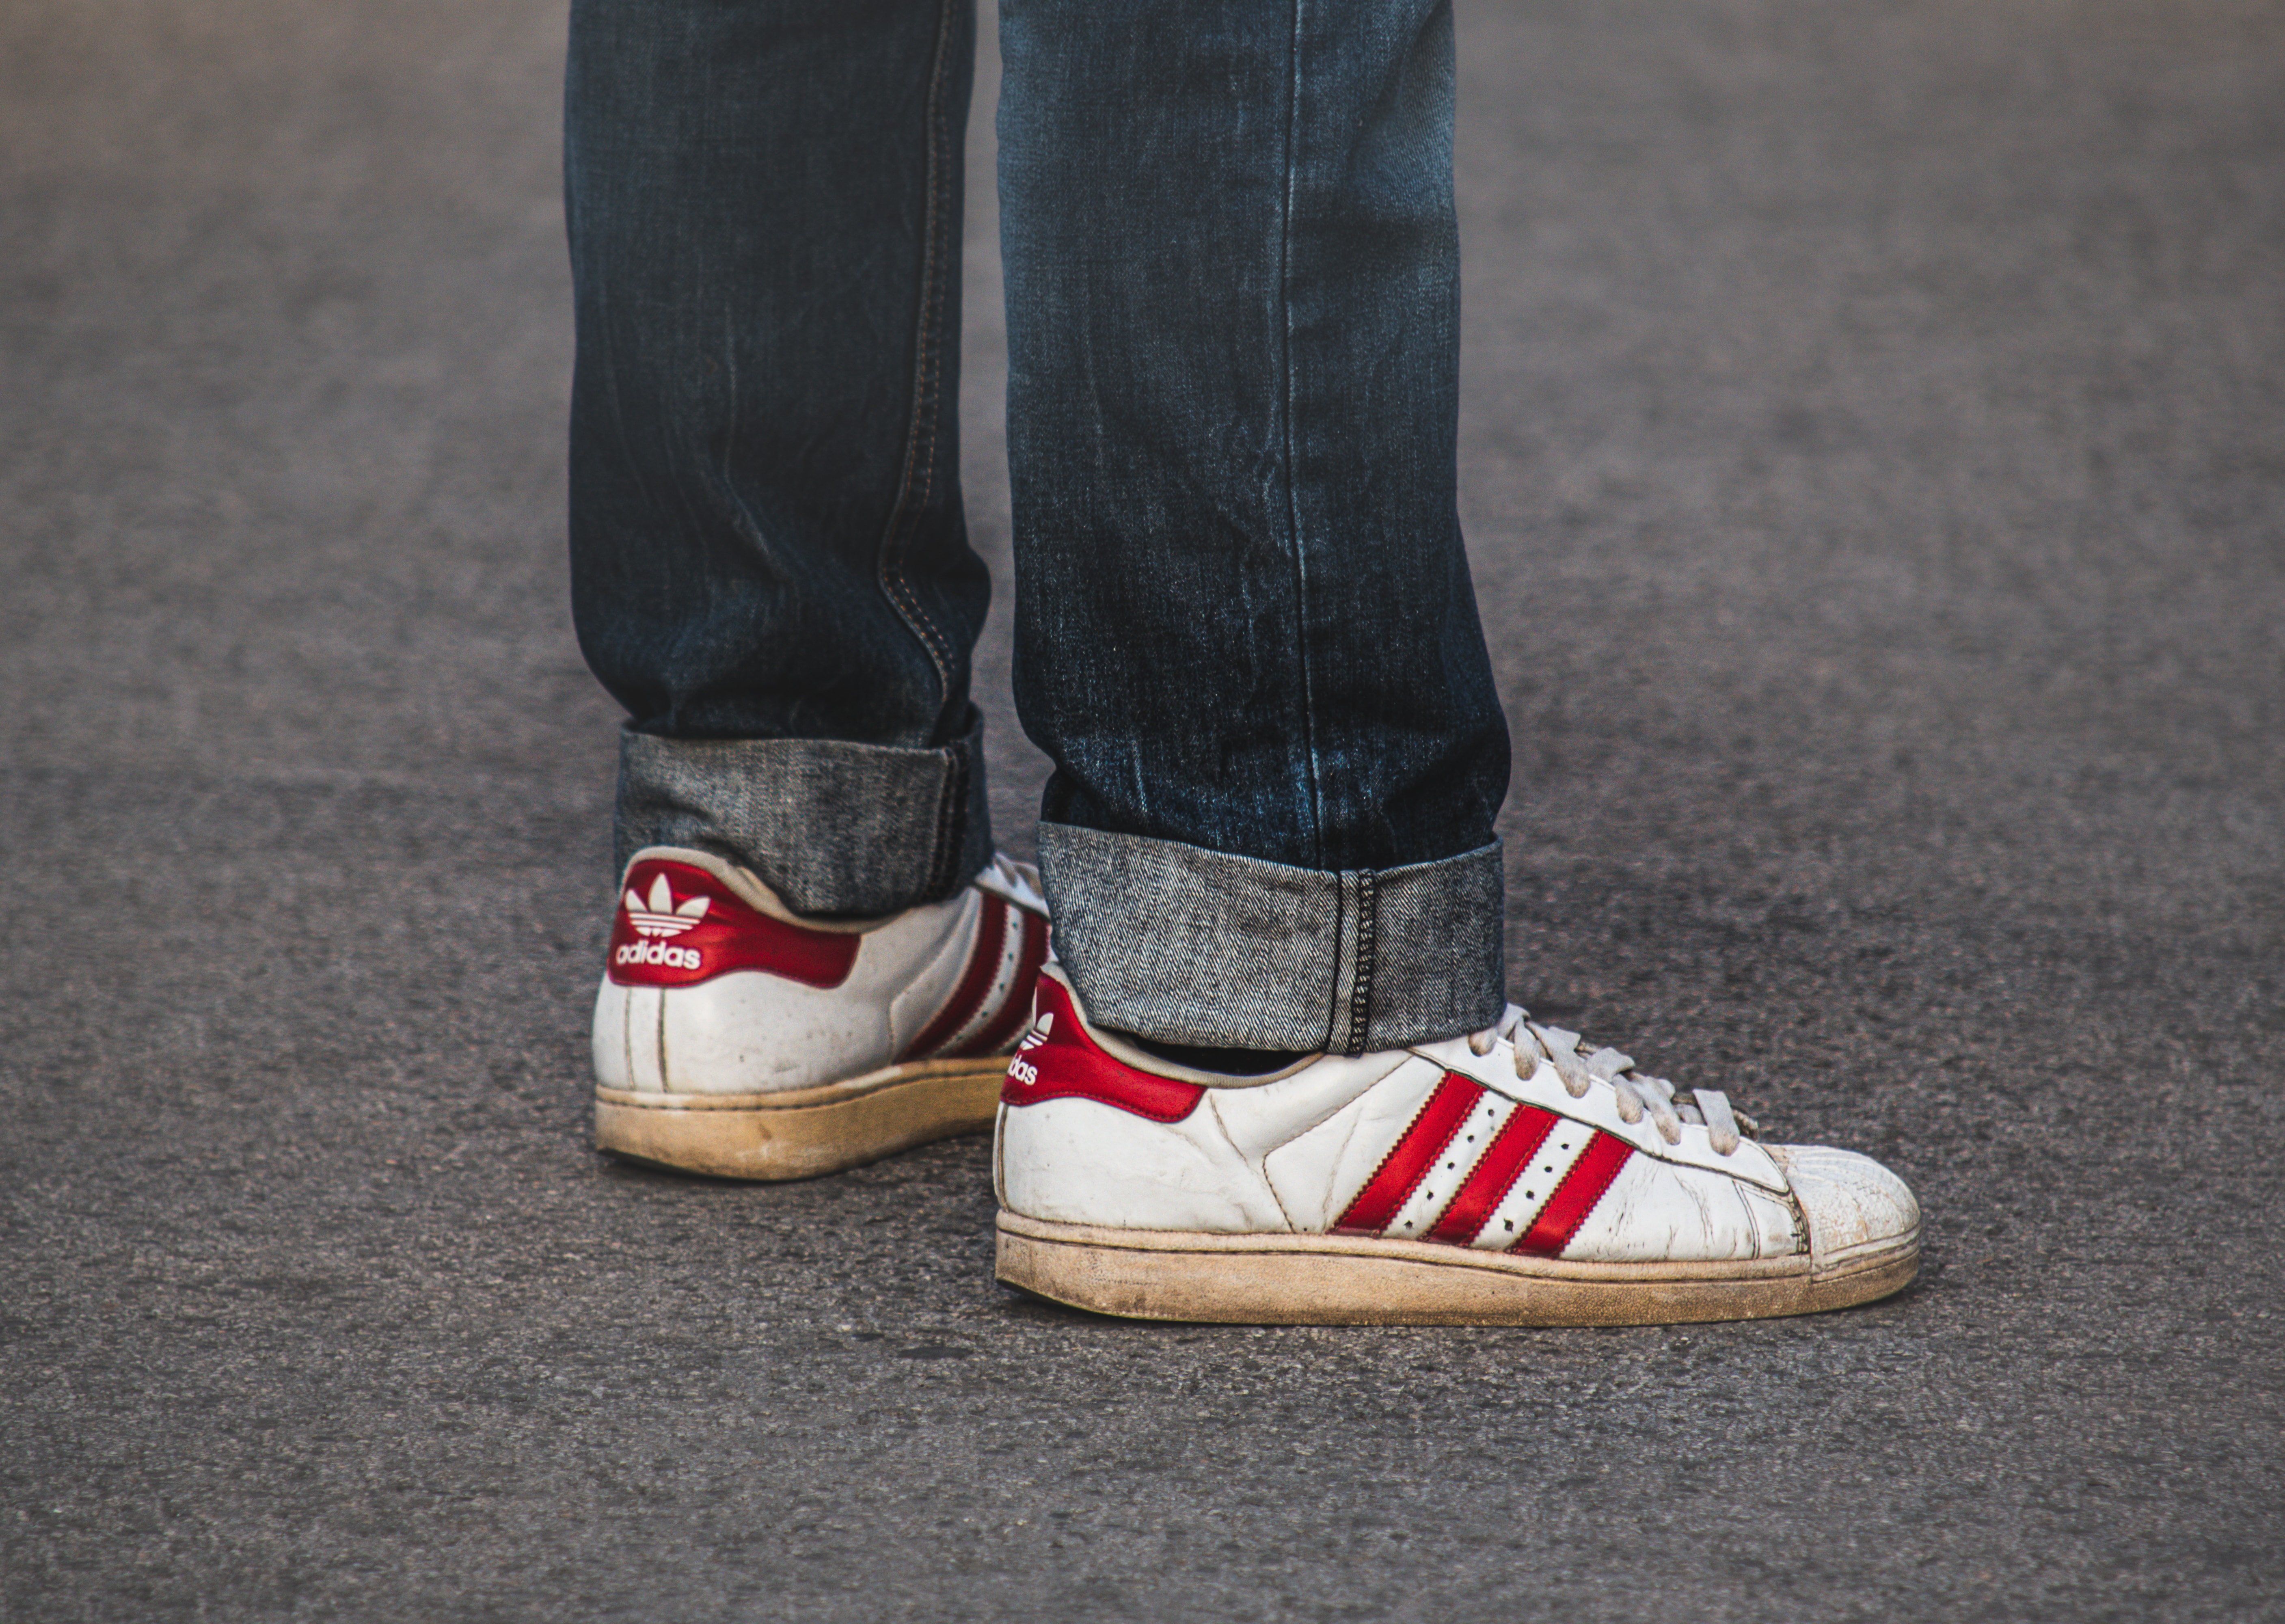 Free picture: Adidas, white, sneakers, pants, jeans, dark blue,